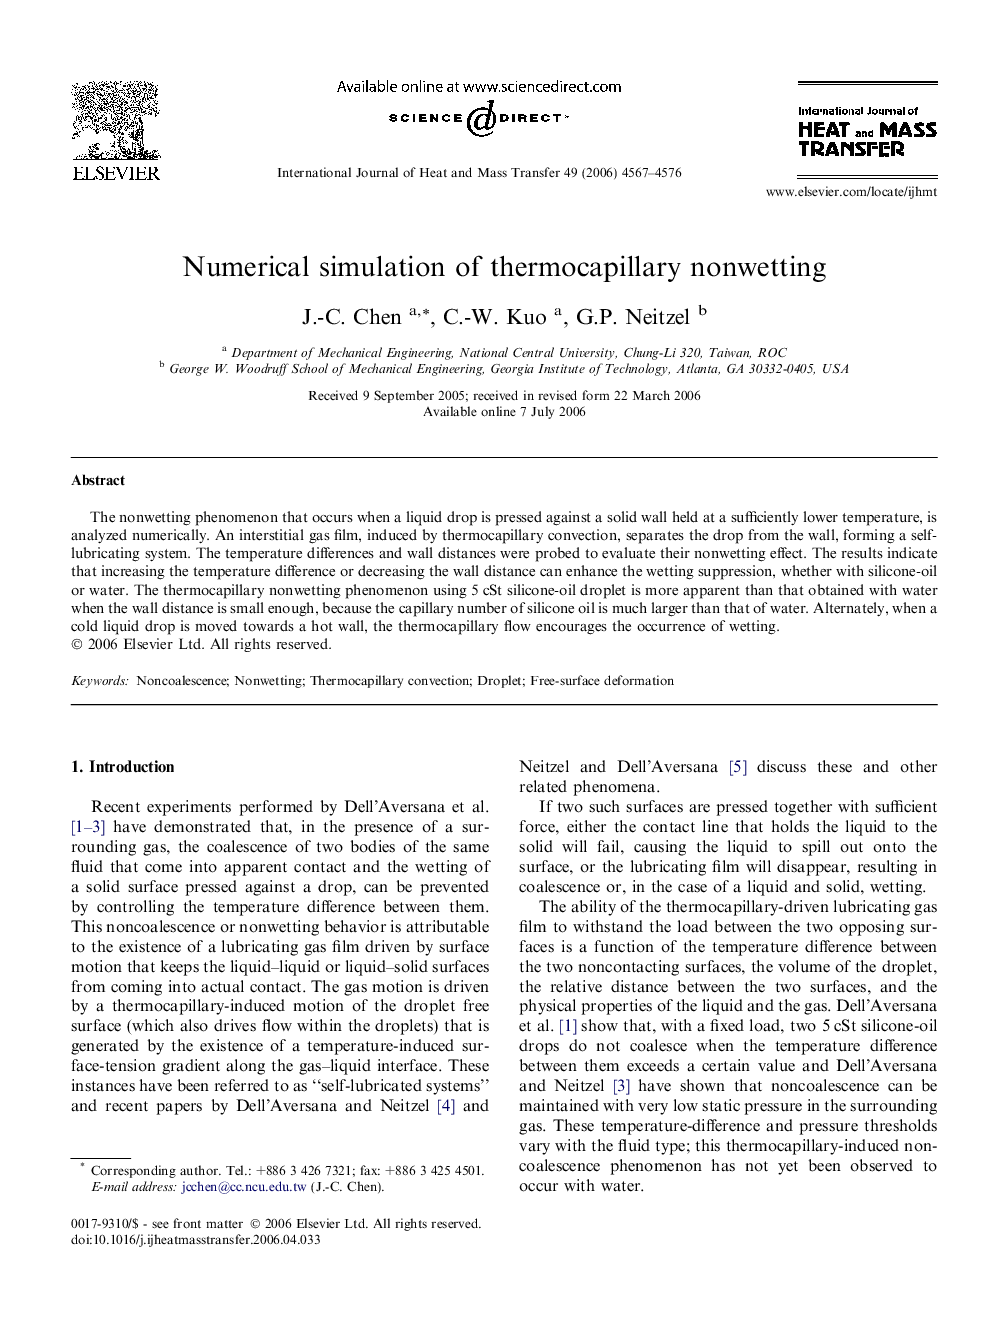 Numerical simulation of thermocapillary nonwetting